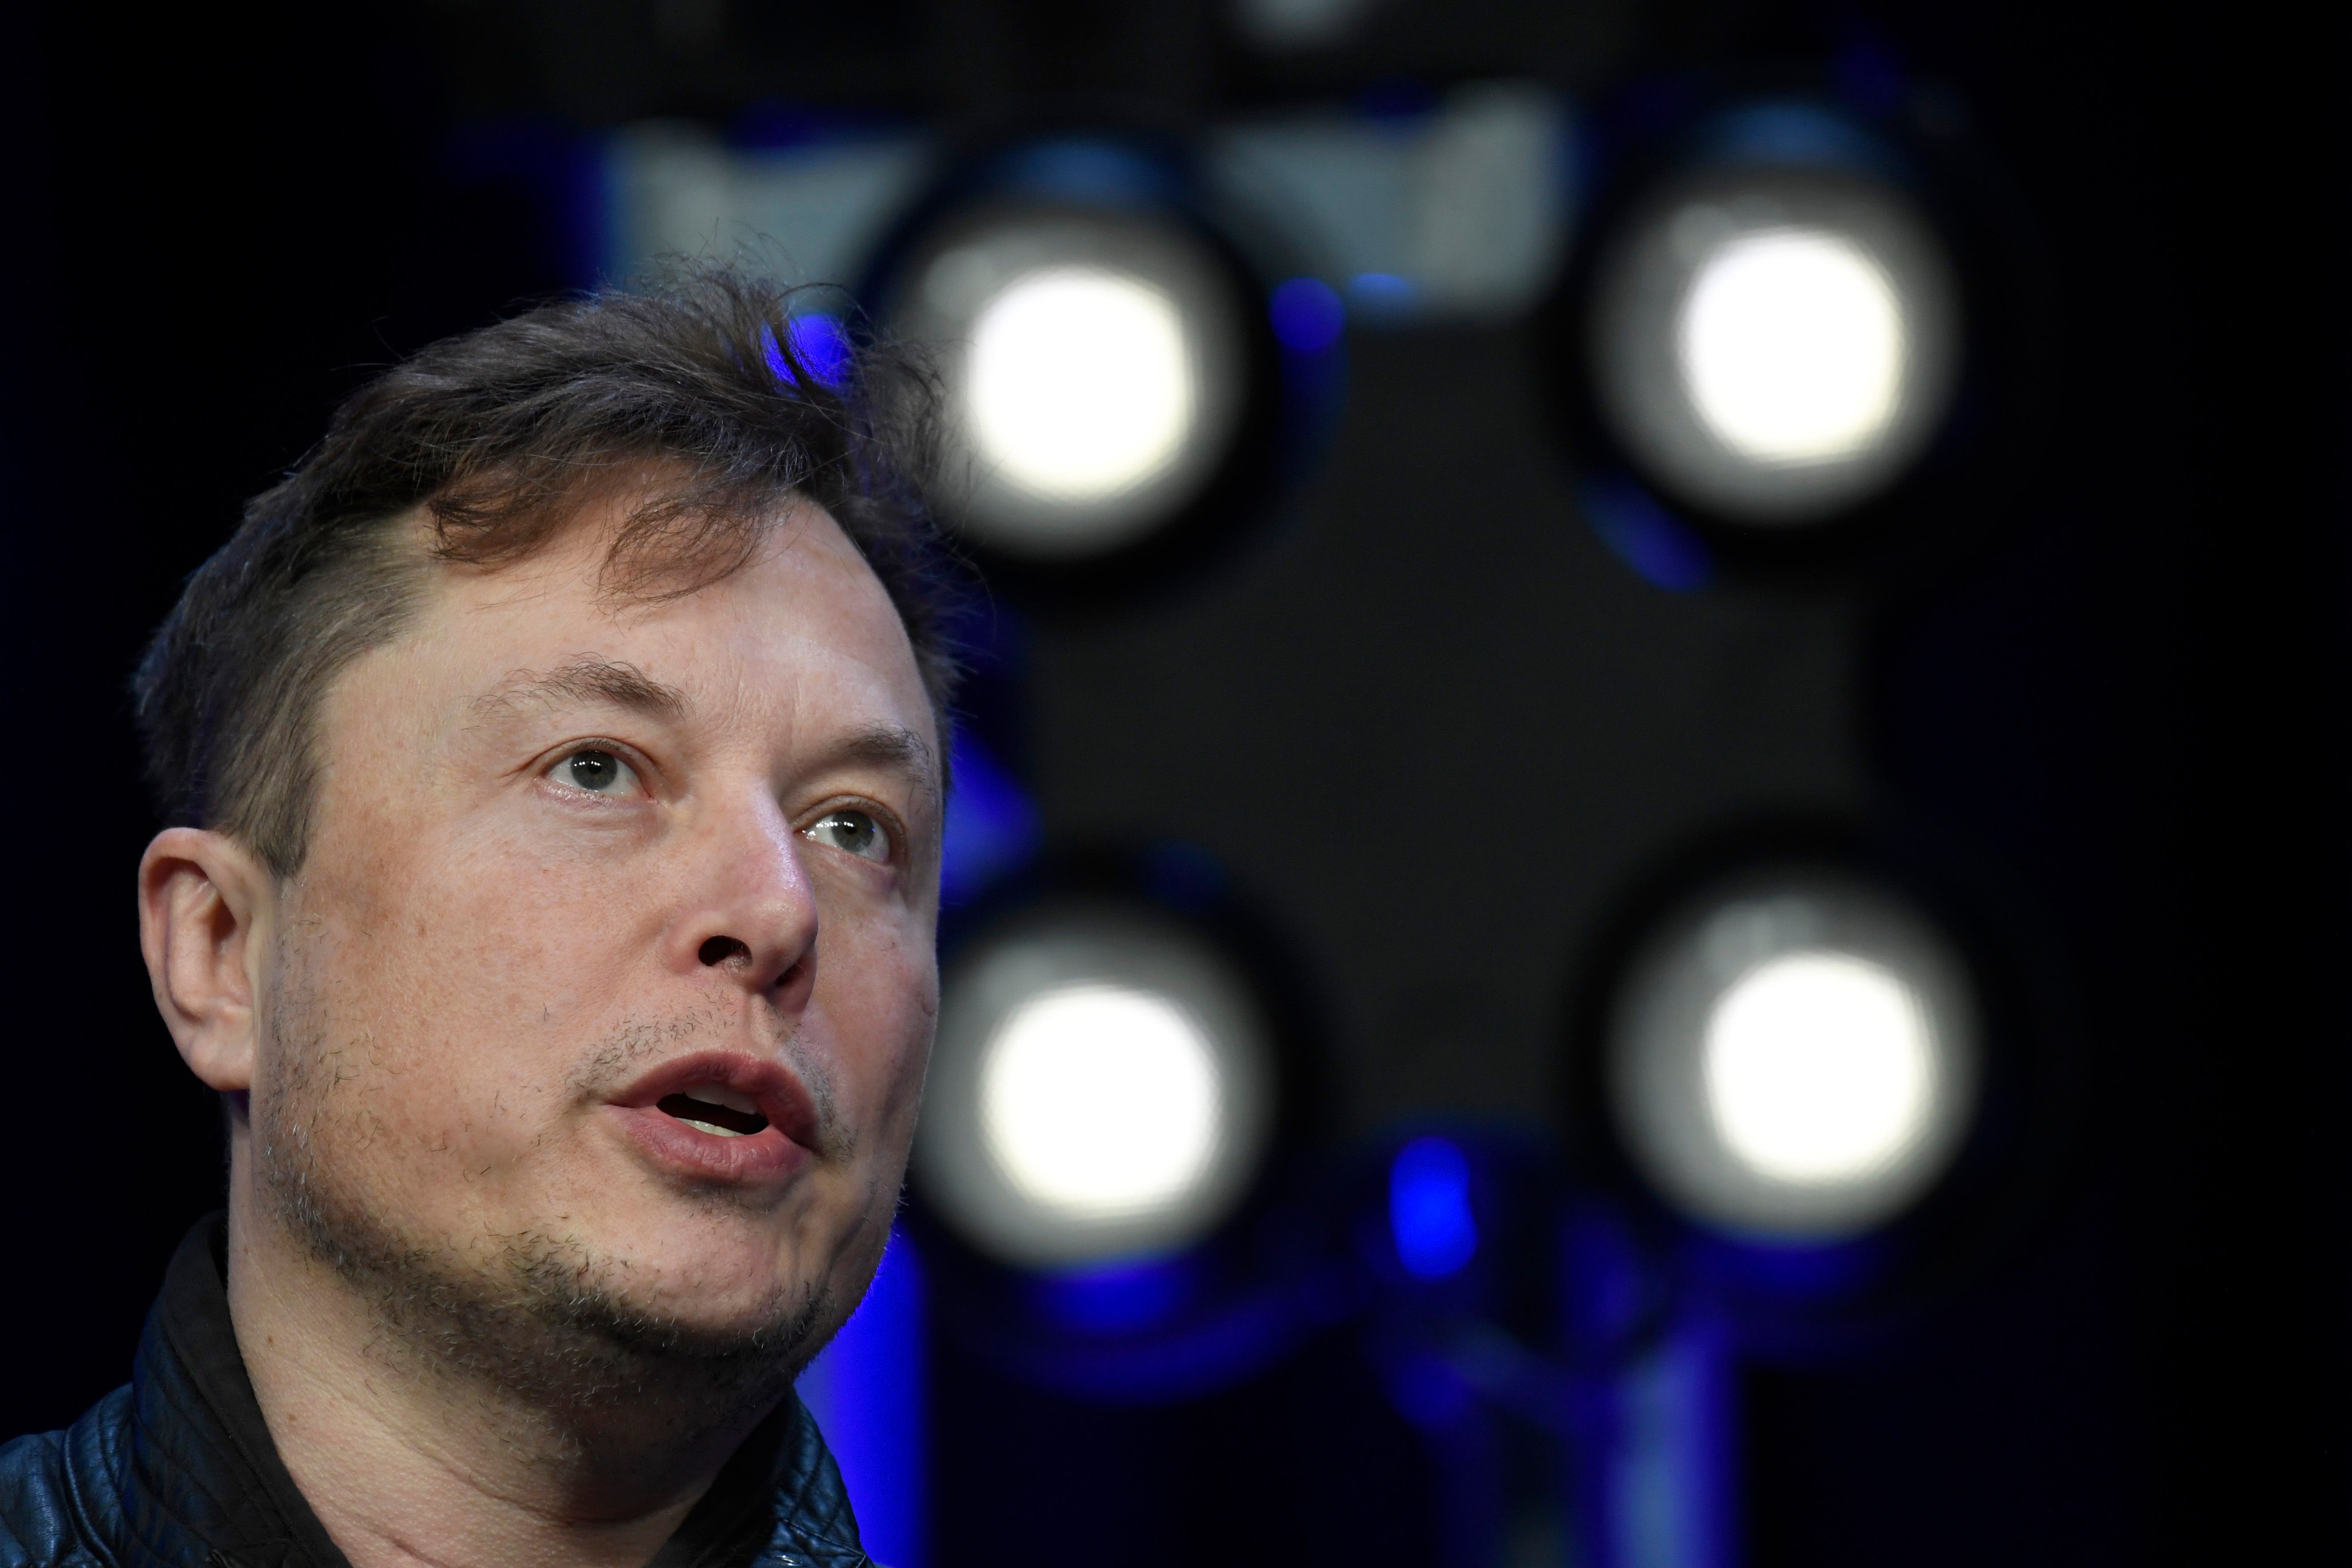 Elon Musk is thought to want to drastically reduce costs at Twitter (Susan Walsh/AP/PA)